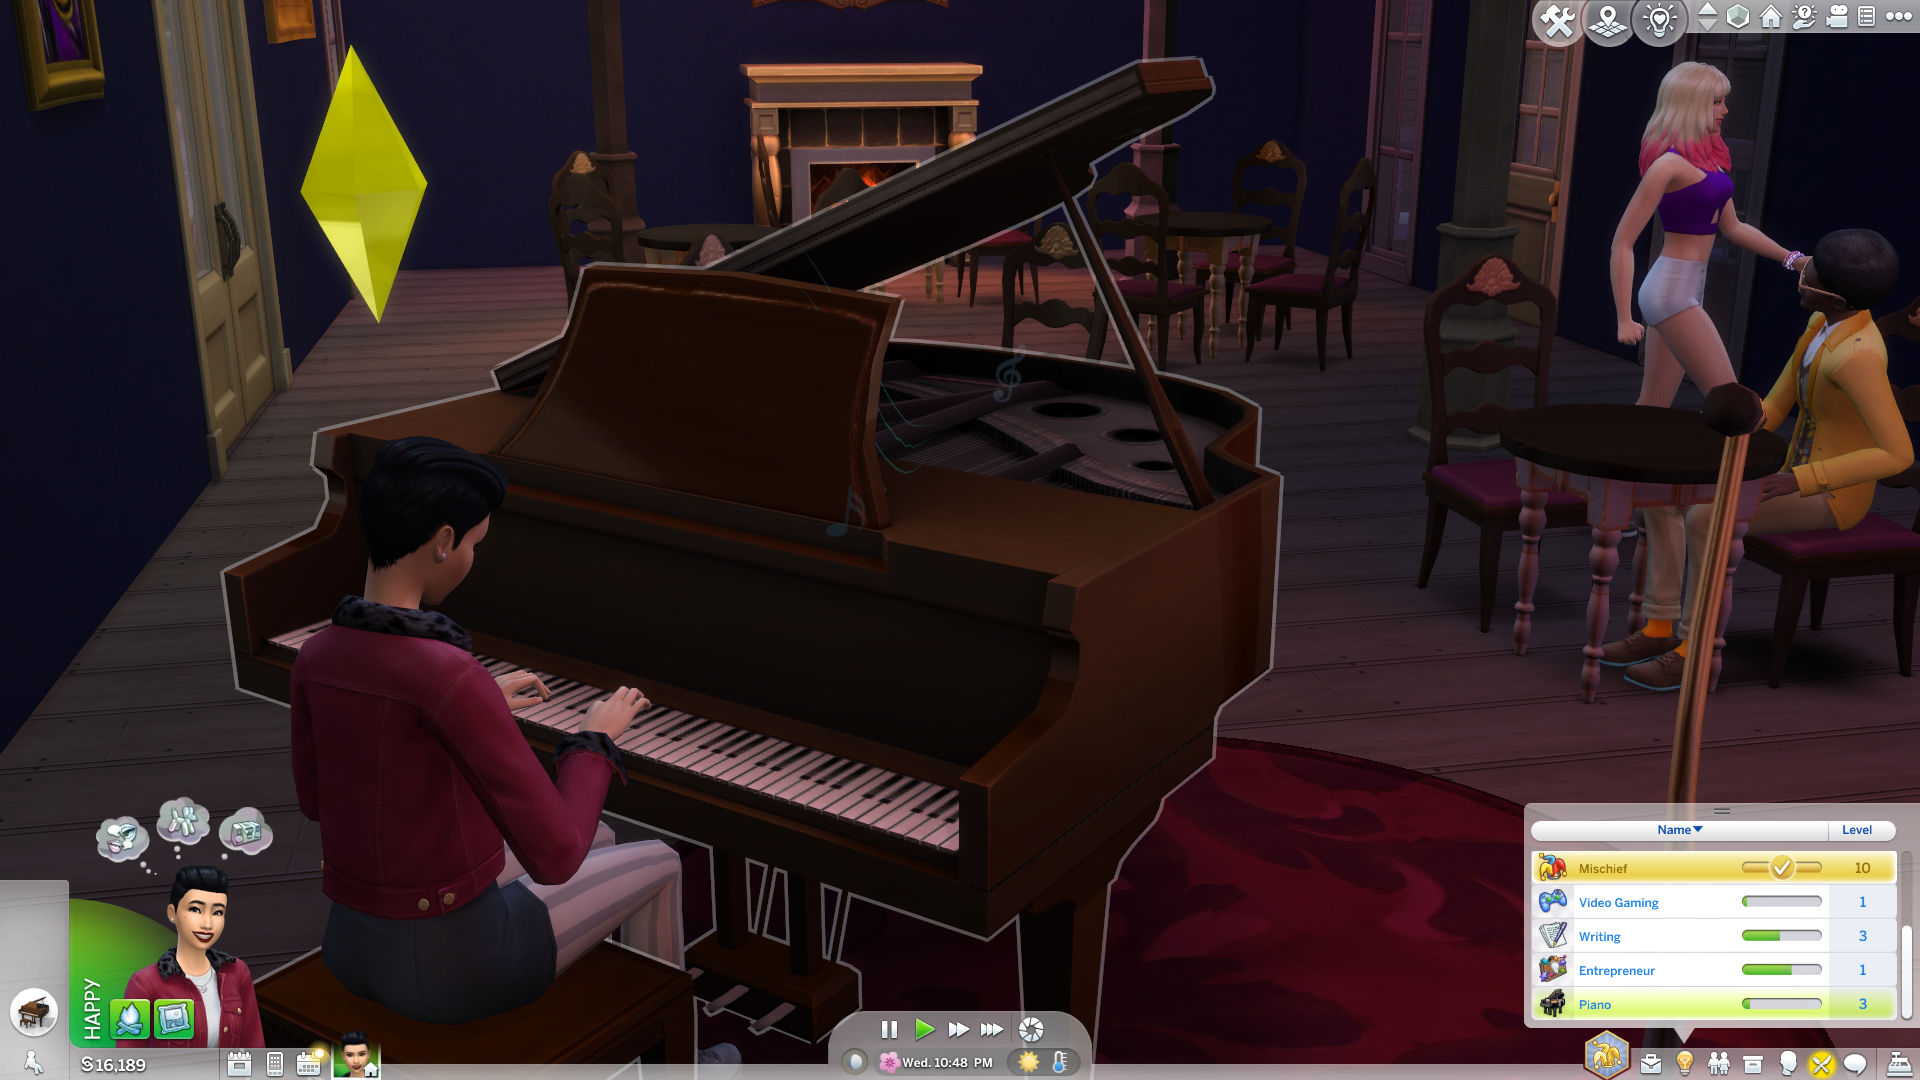 Playing the piano in The Sims 4